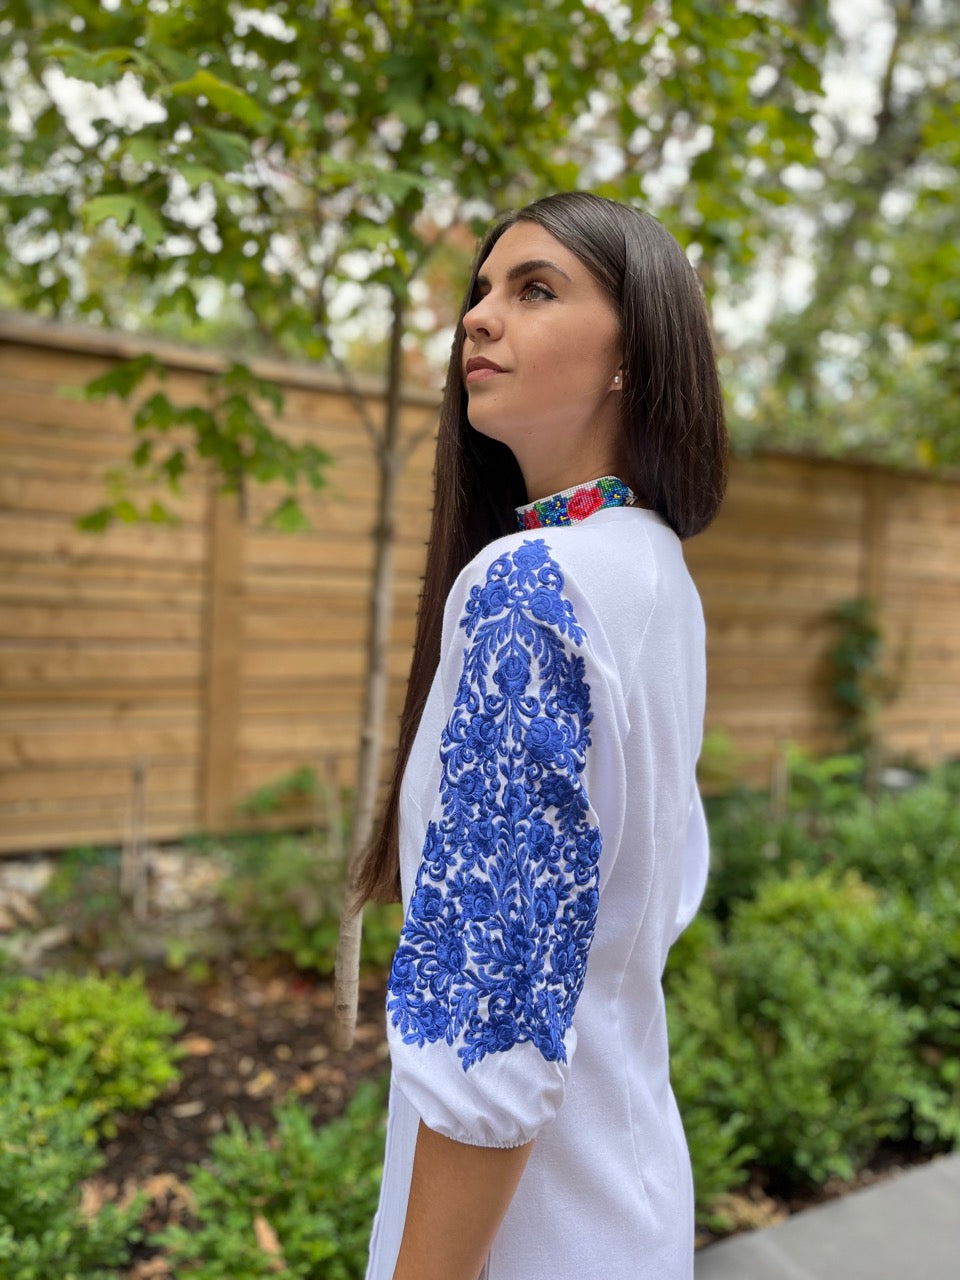 The Long White Ukrainian Dress with Floral Embroidery